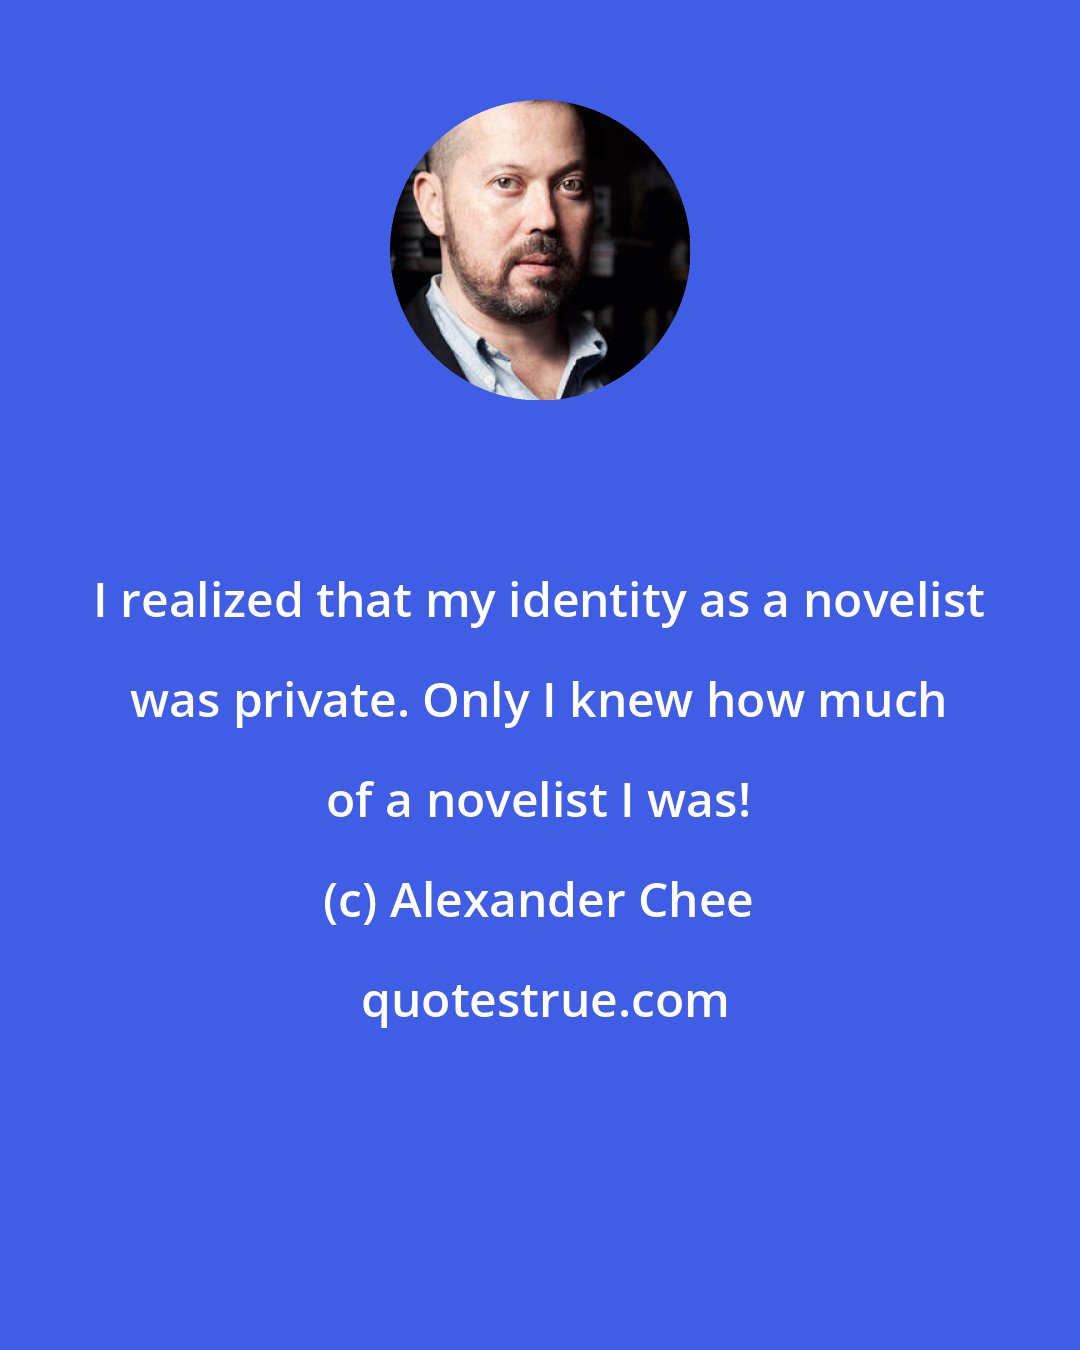 Alexander Chee: I realized that my identity as a novelist was private. Only I knew how much of a novelist I was!